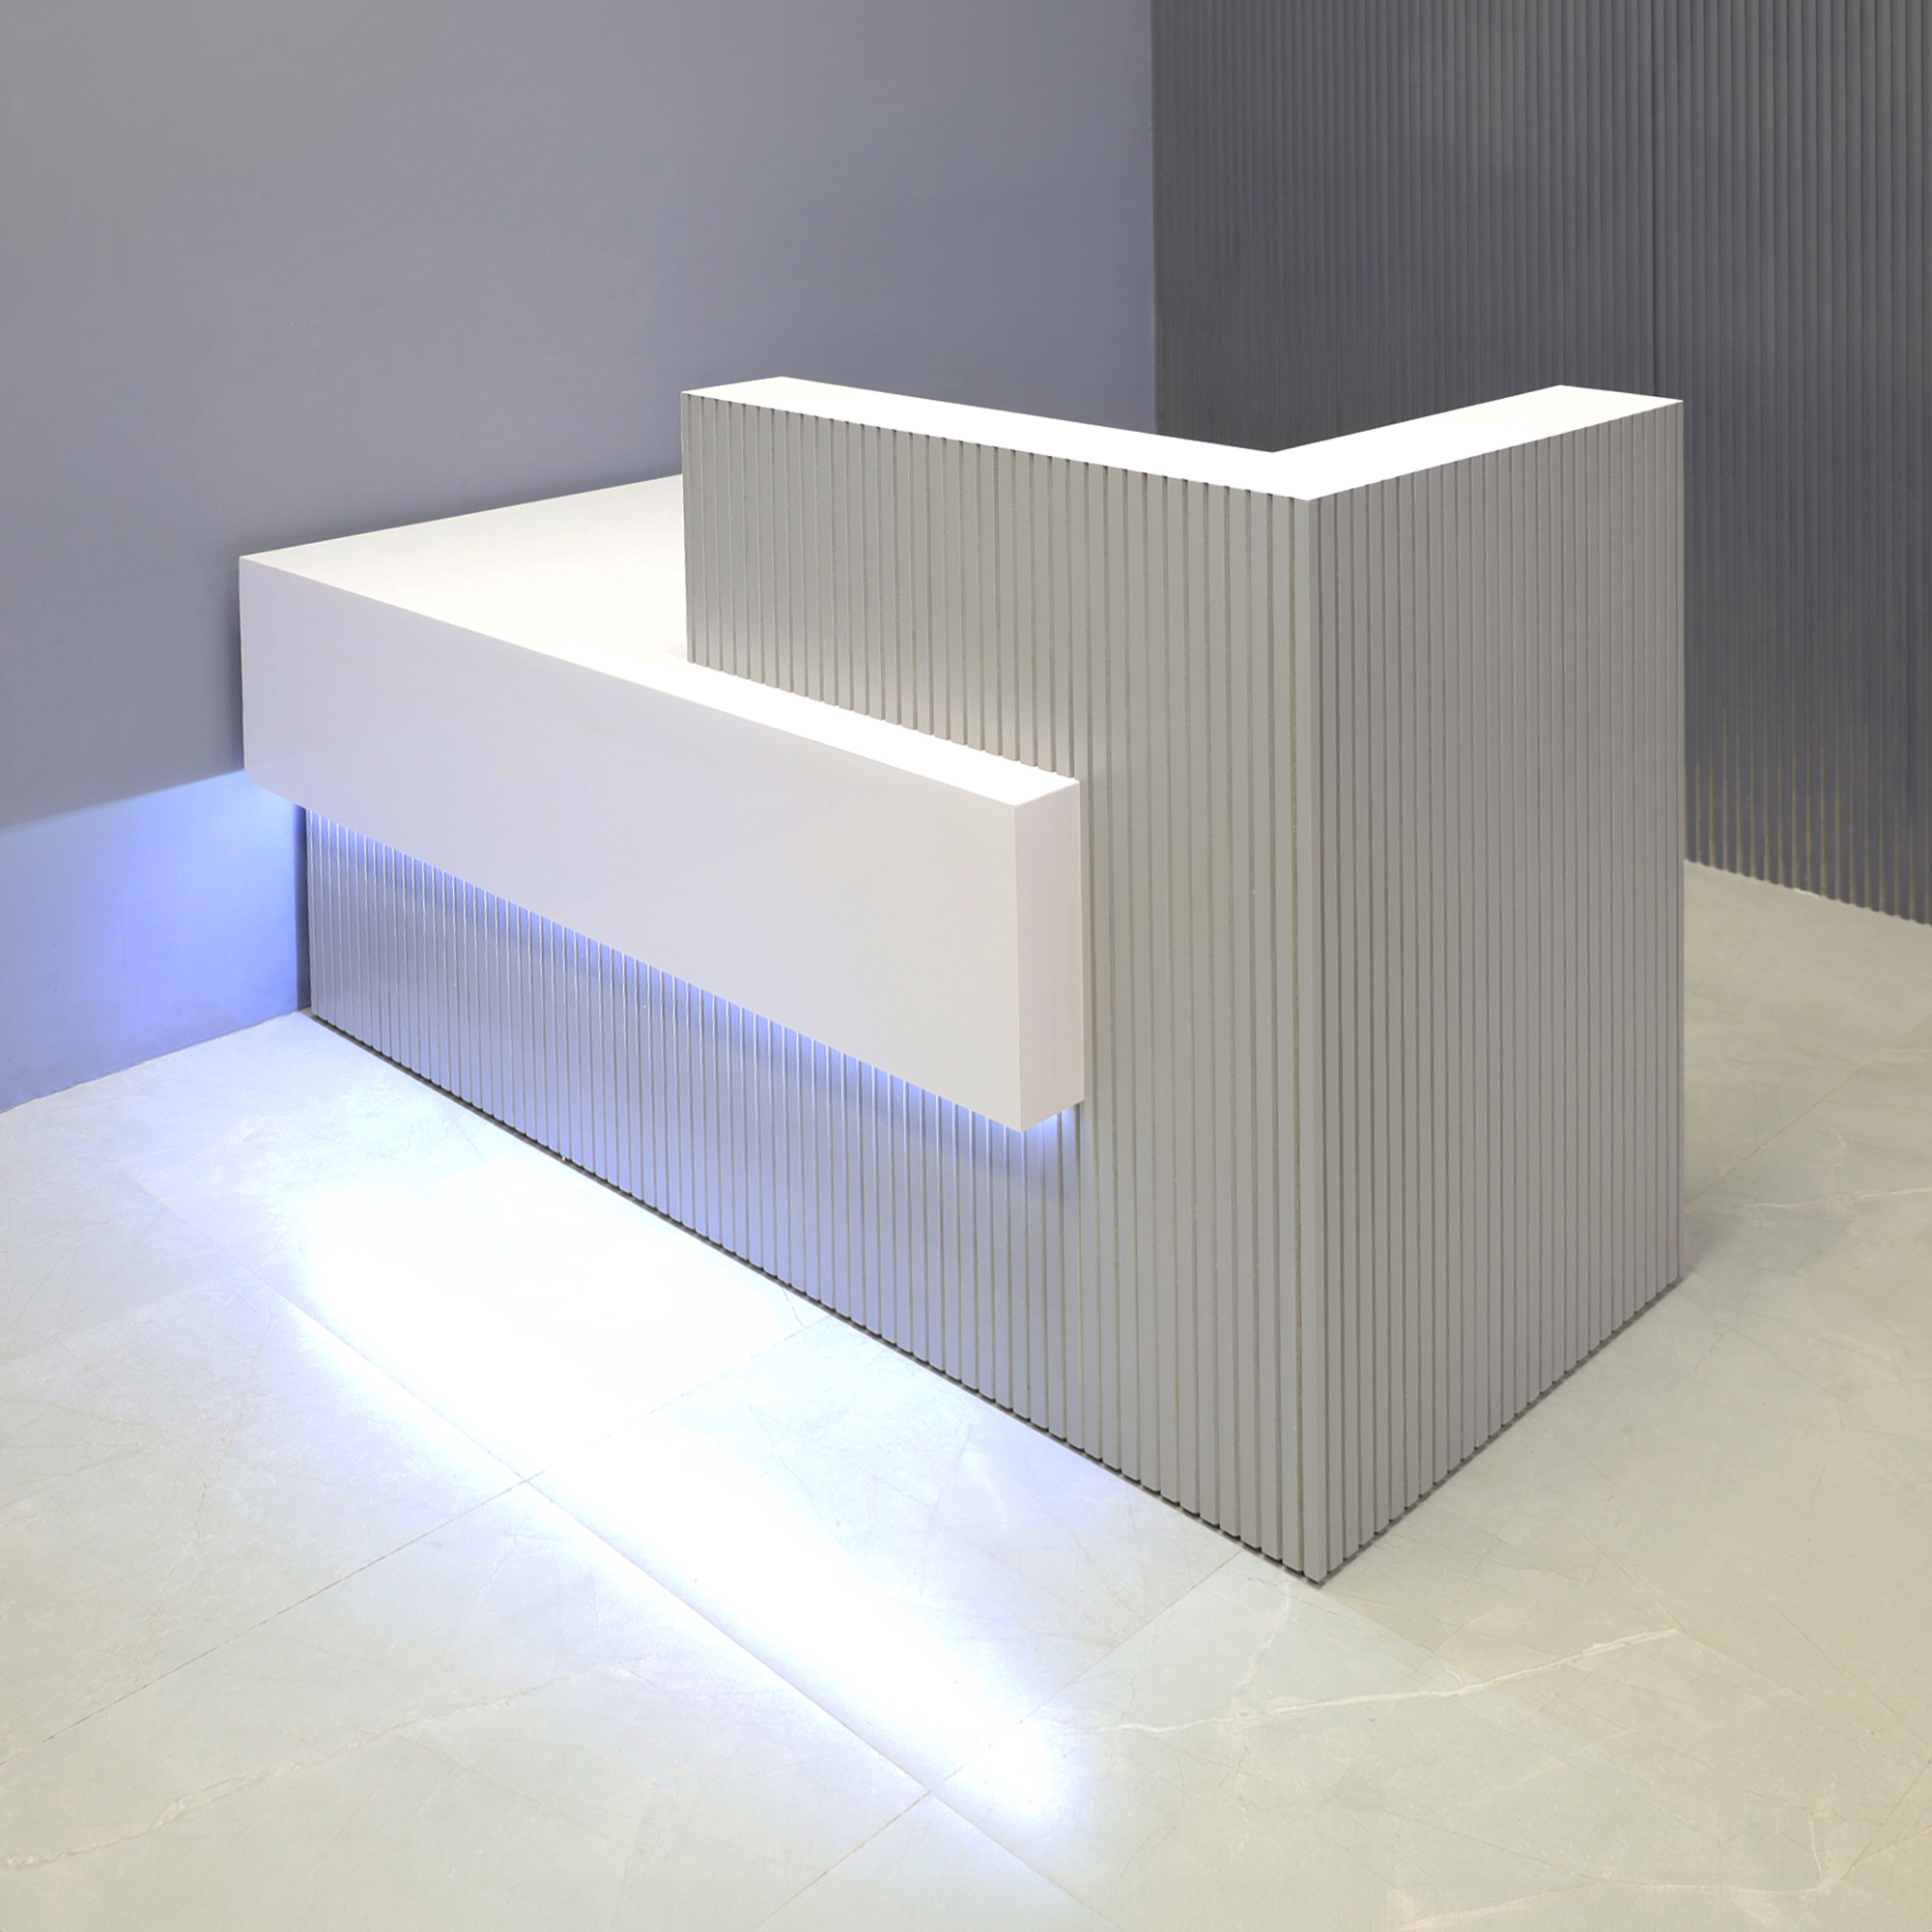 72-inch Atlanta Reception Desk in fog gray tambour countertop & base and white gloss laminate workspace & front accent, with warm white LED, shown here.